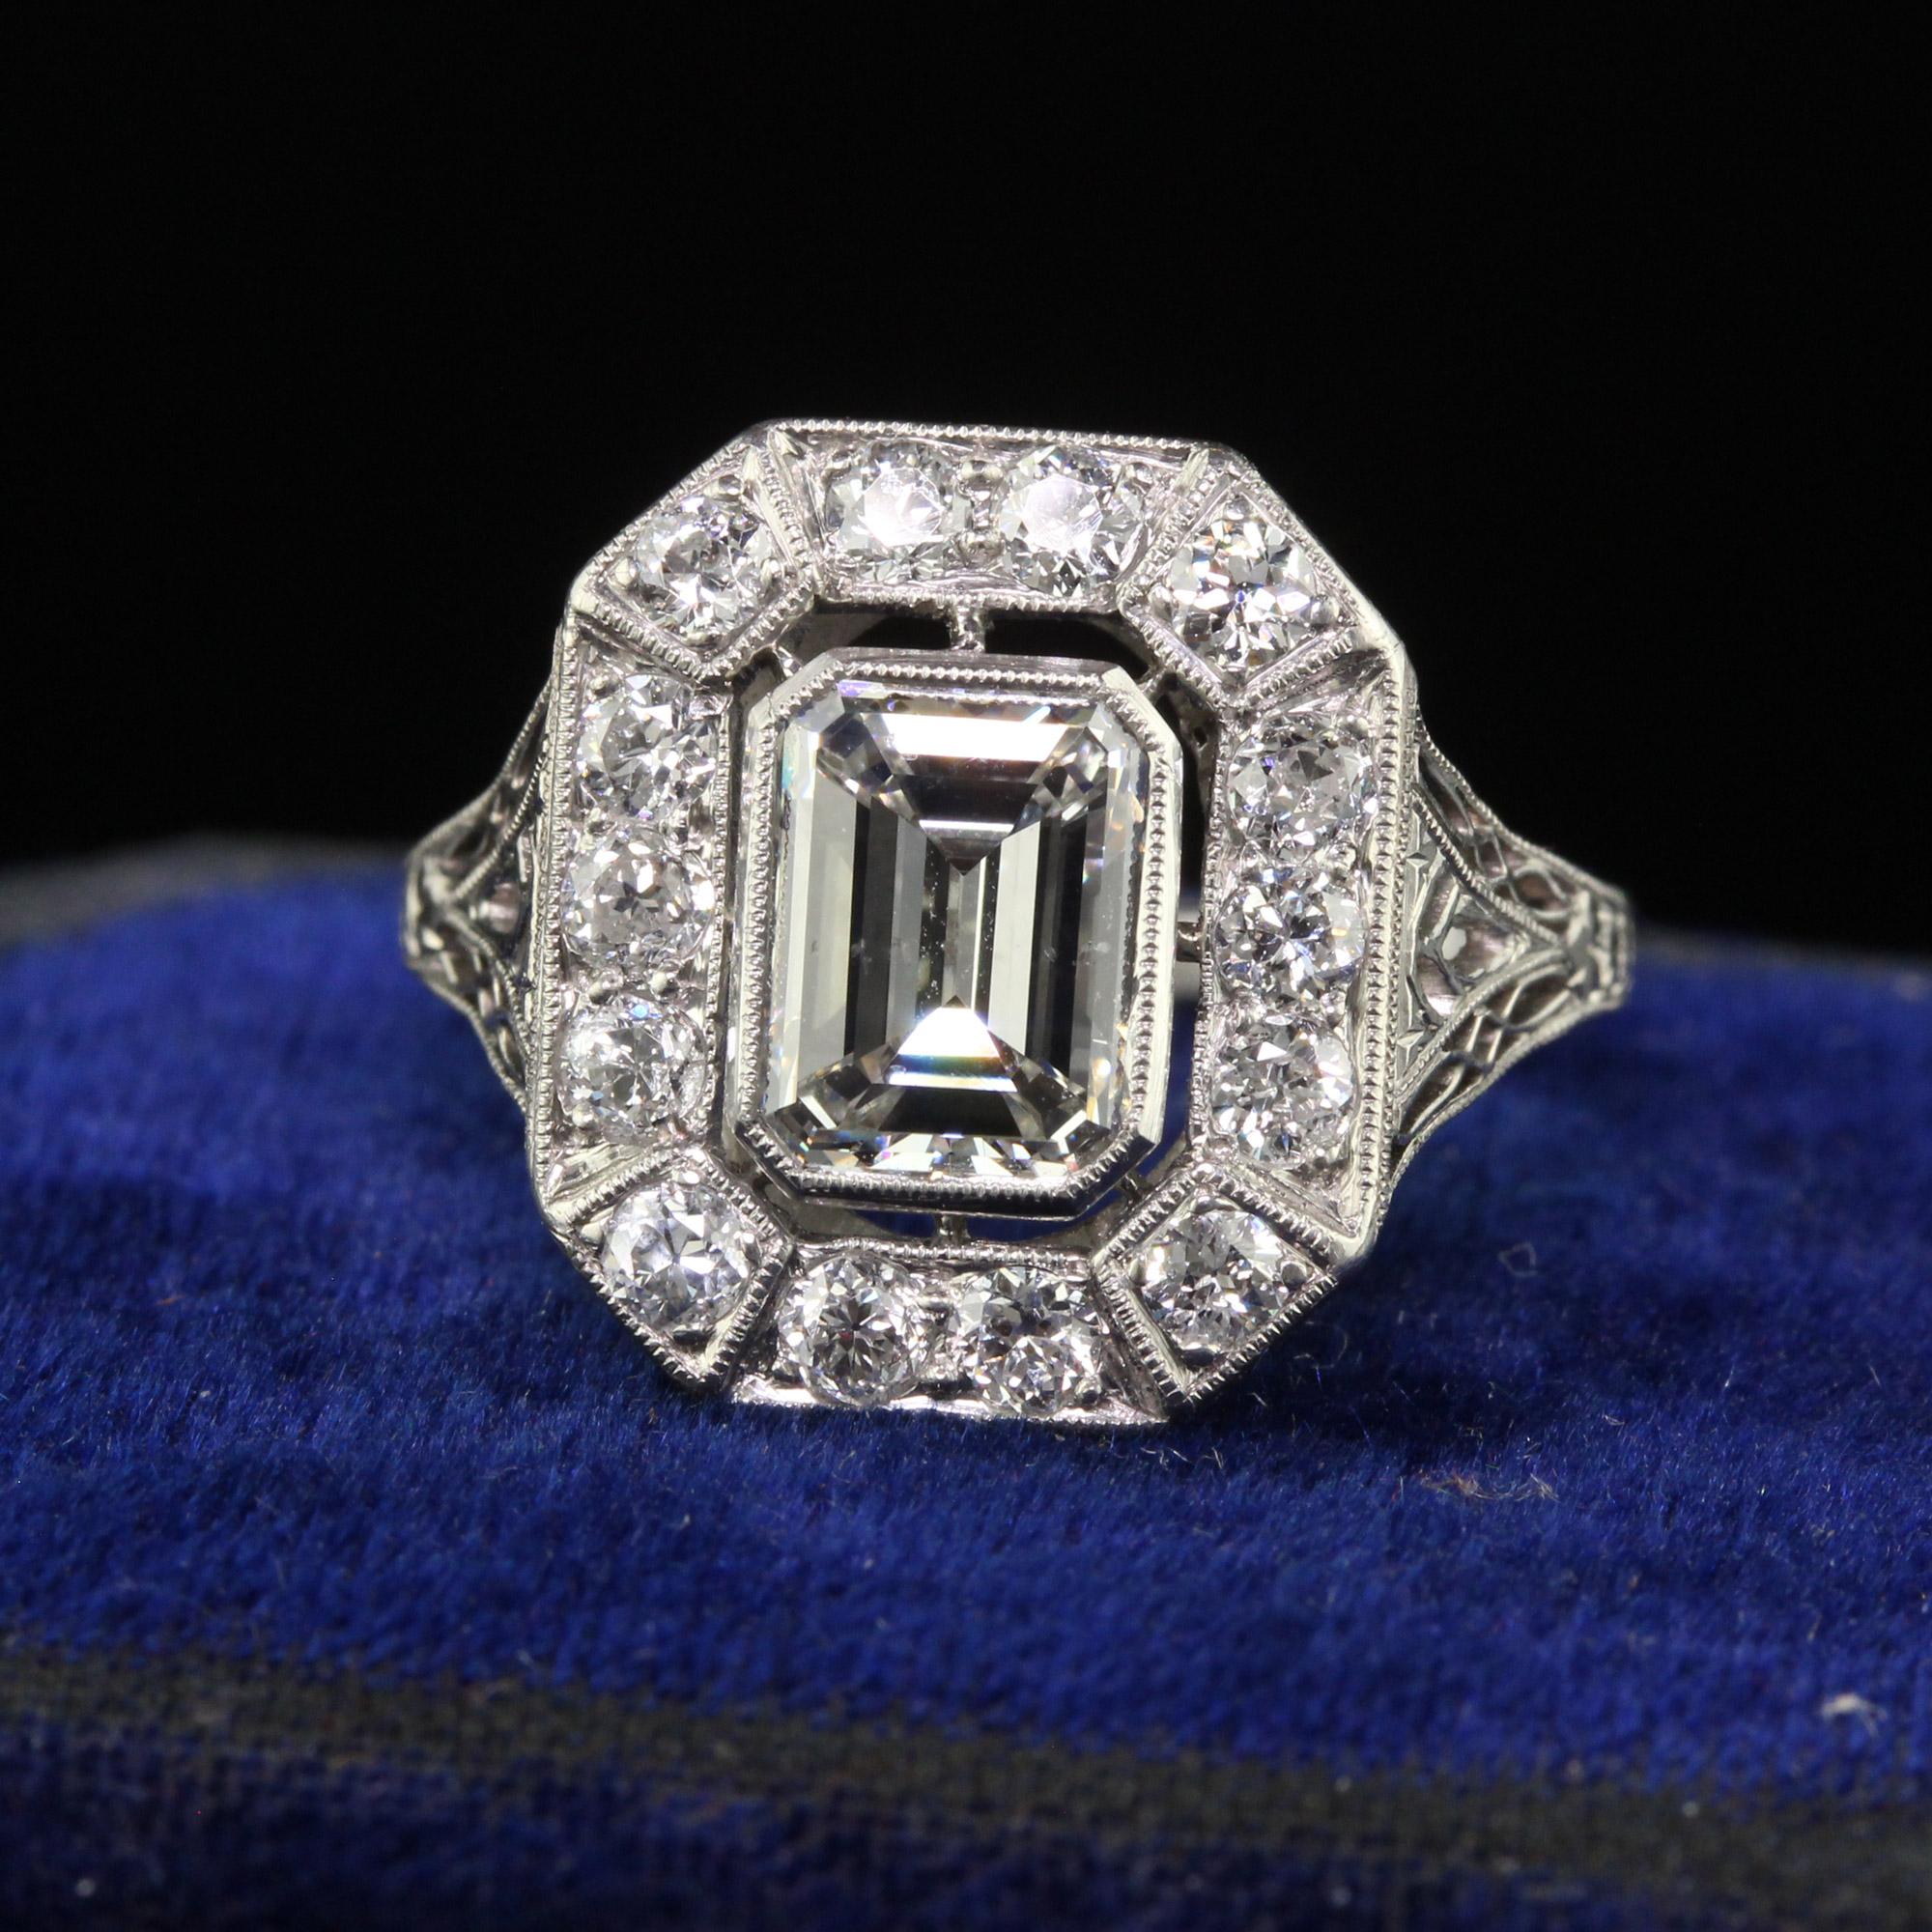 Beautiful Antique Art Deco Emerald Cut Diamond Filigree Engagement Ring - GIA. This gorgeous engagement ring is crafted in platinum. The center holds an old emerald cut diamond that has a GIA report. There are old European cut diamonds surrounding